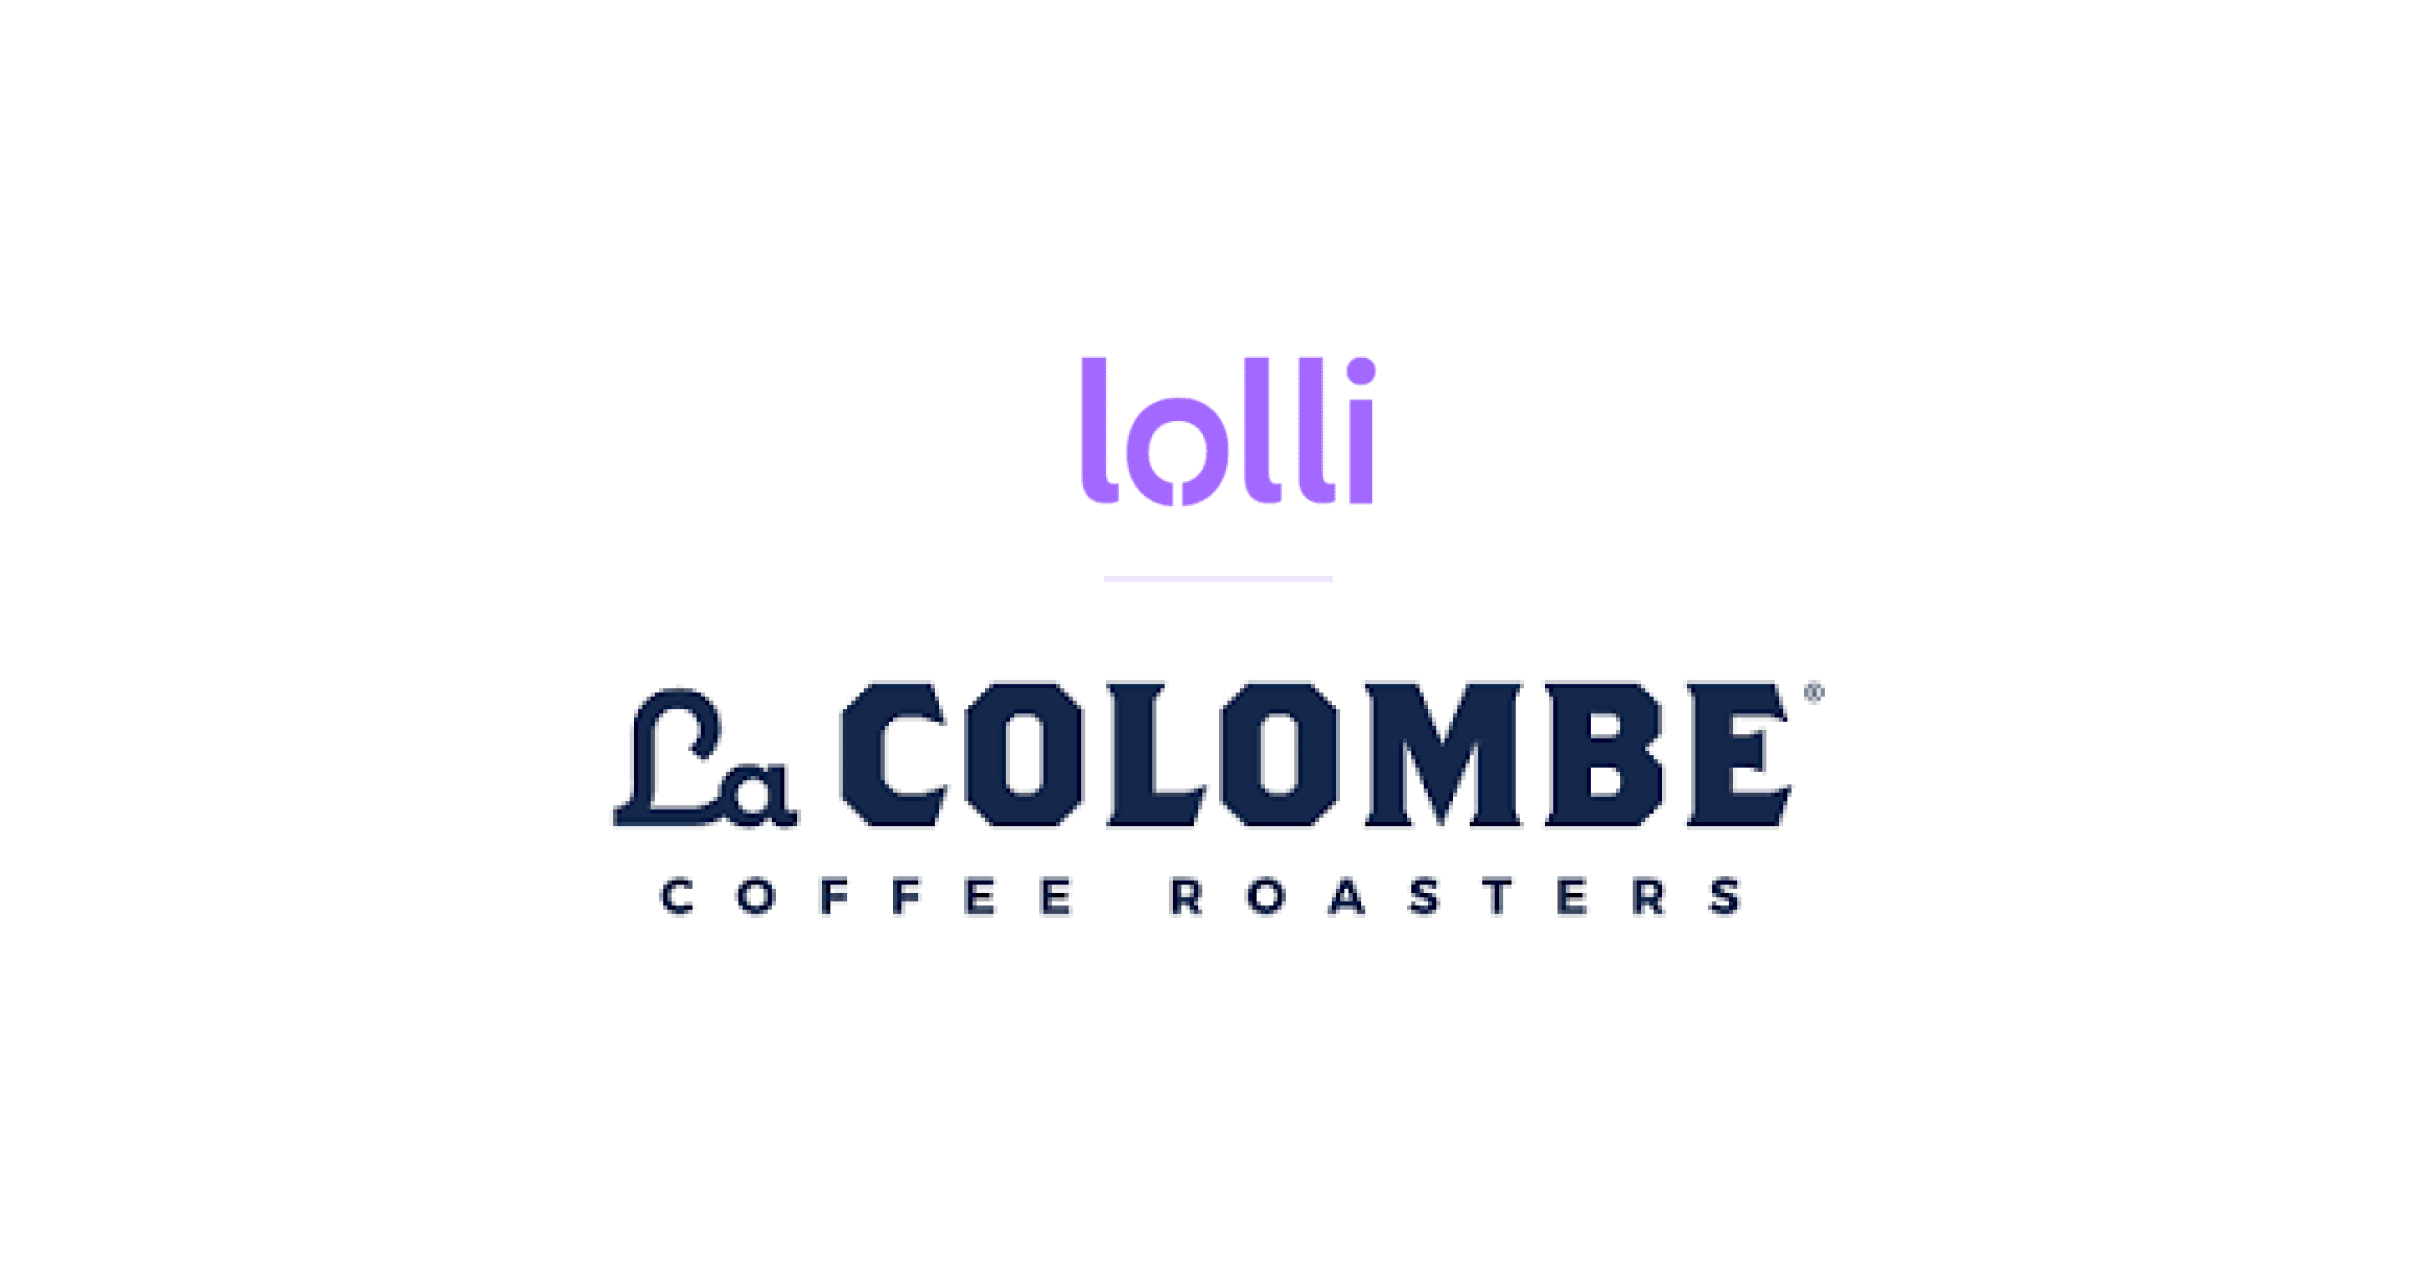 La Colombe is Now On Lolli!